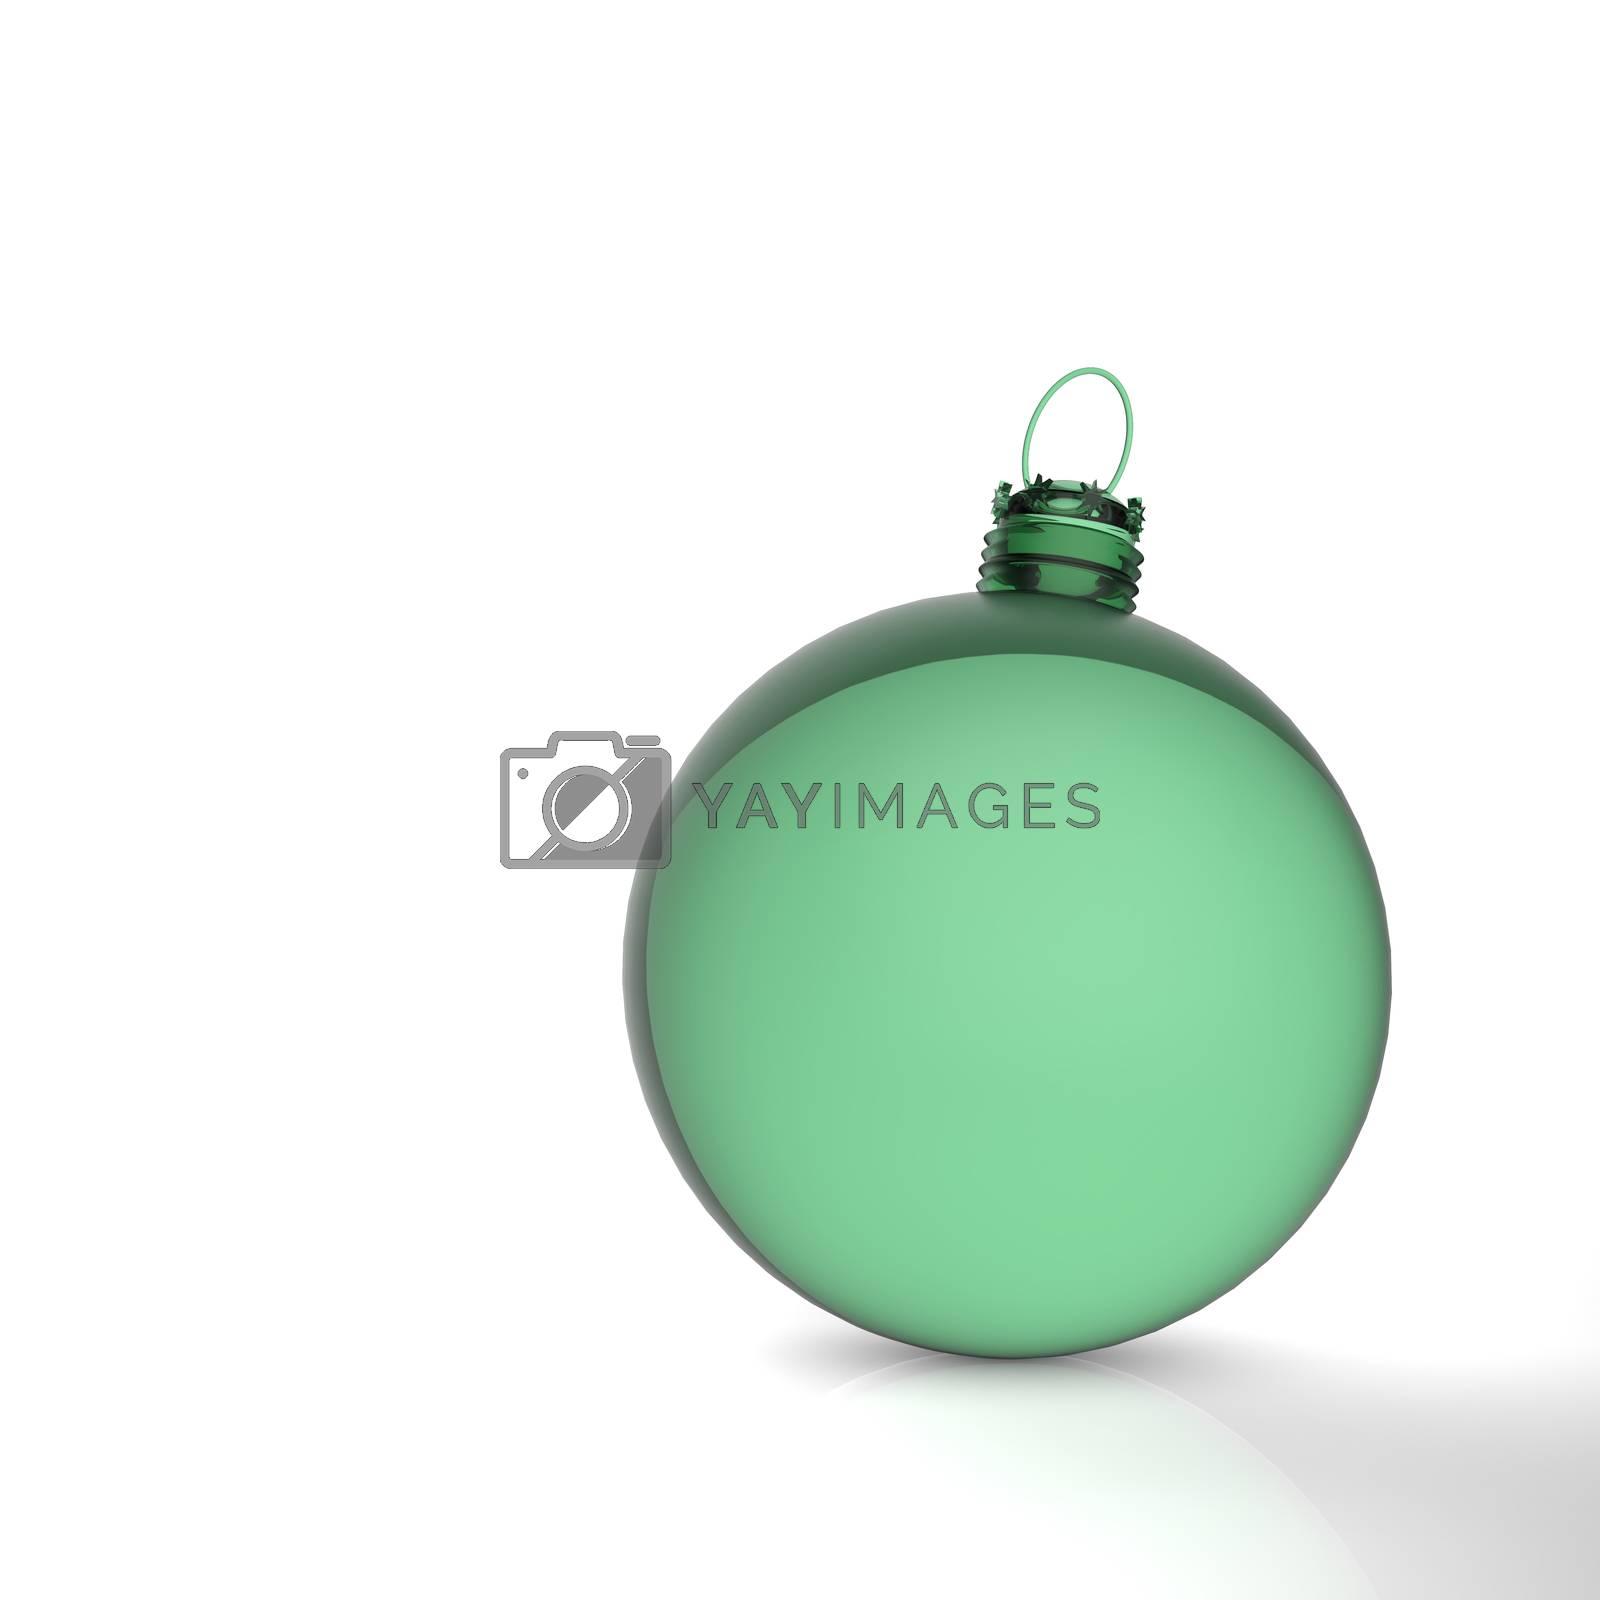 Royalty free image of Empty Christmas ornament  by everythingpossible